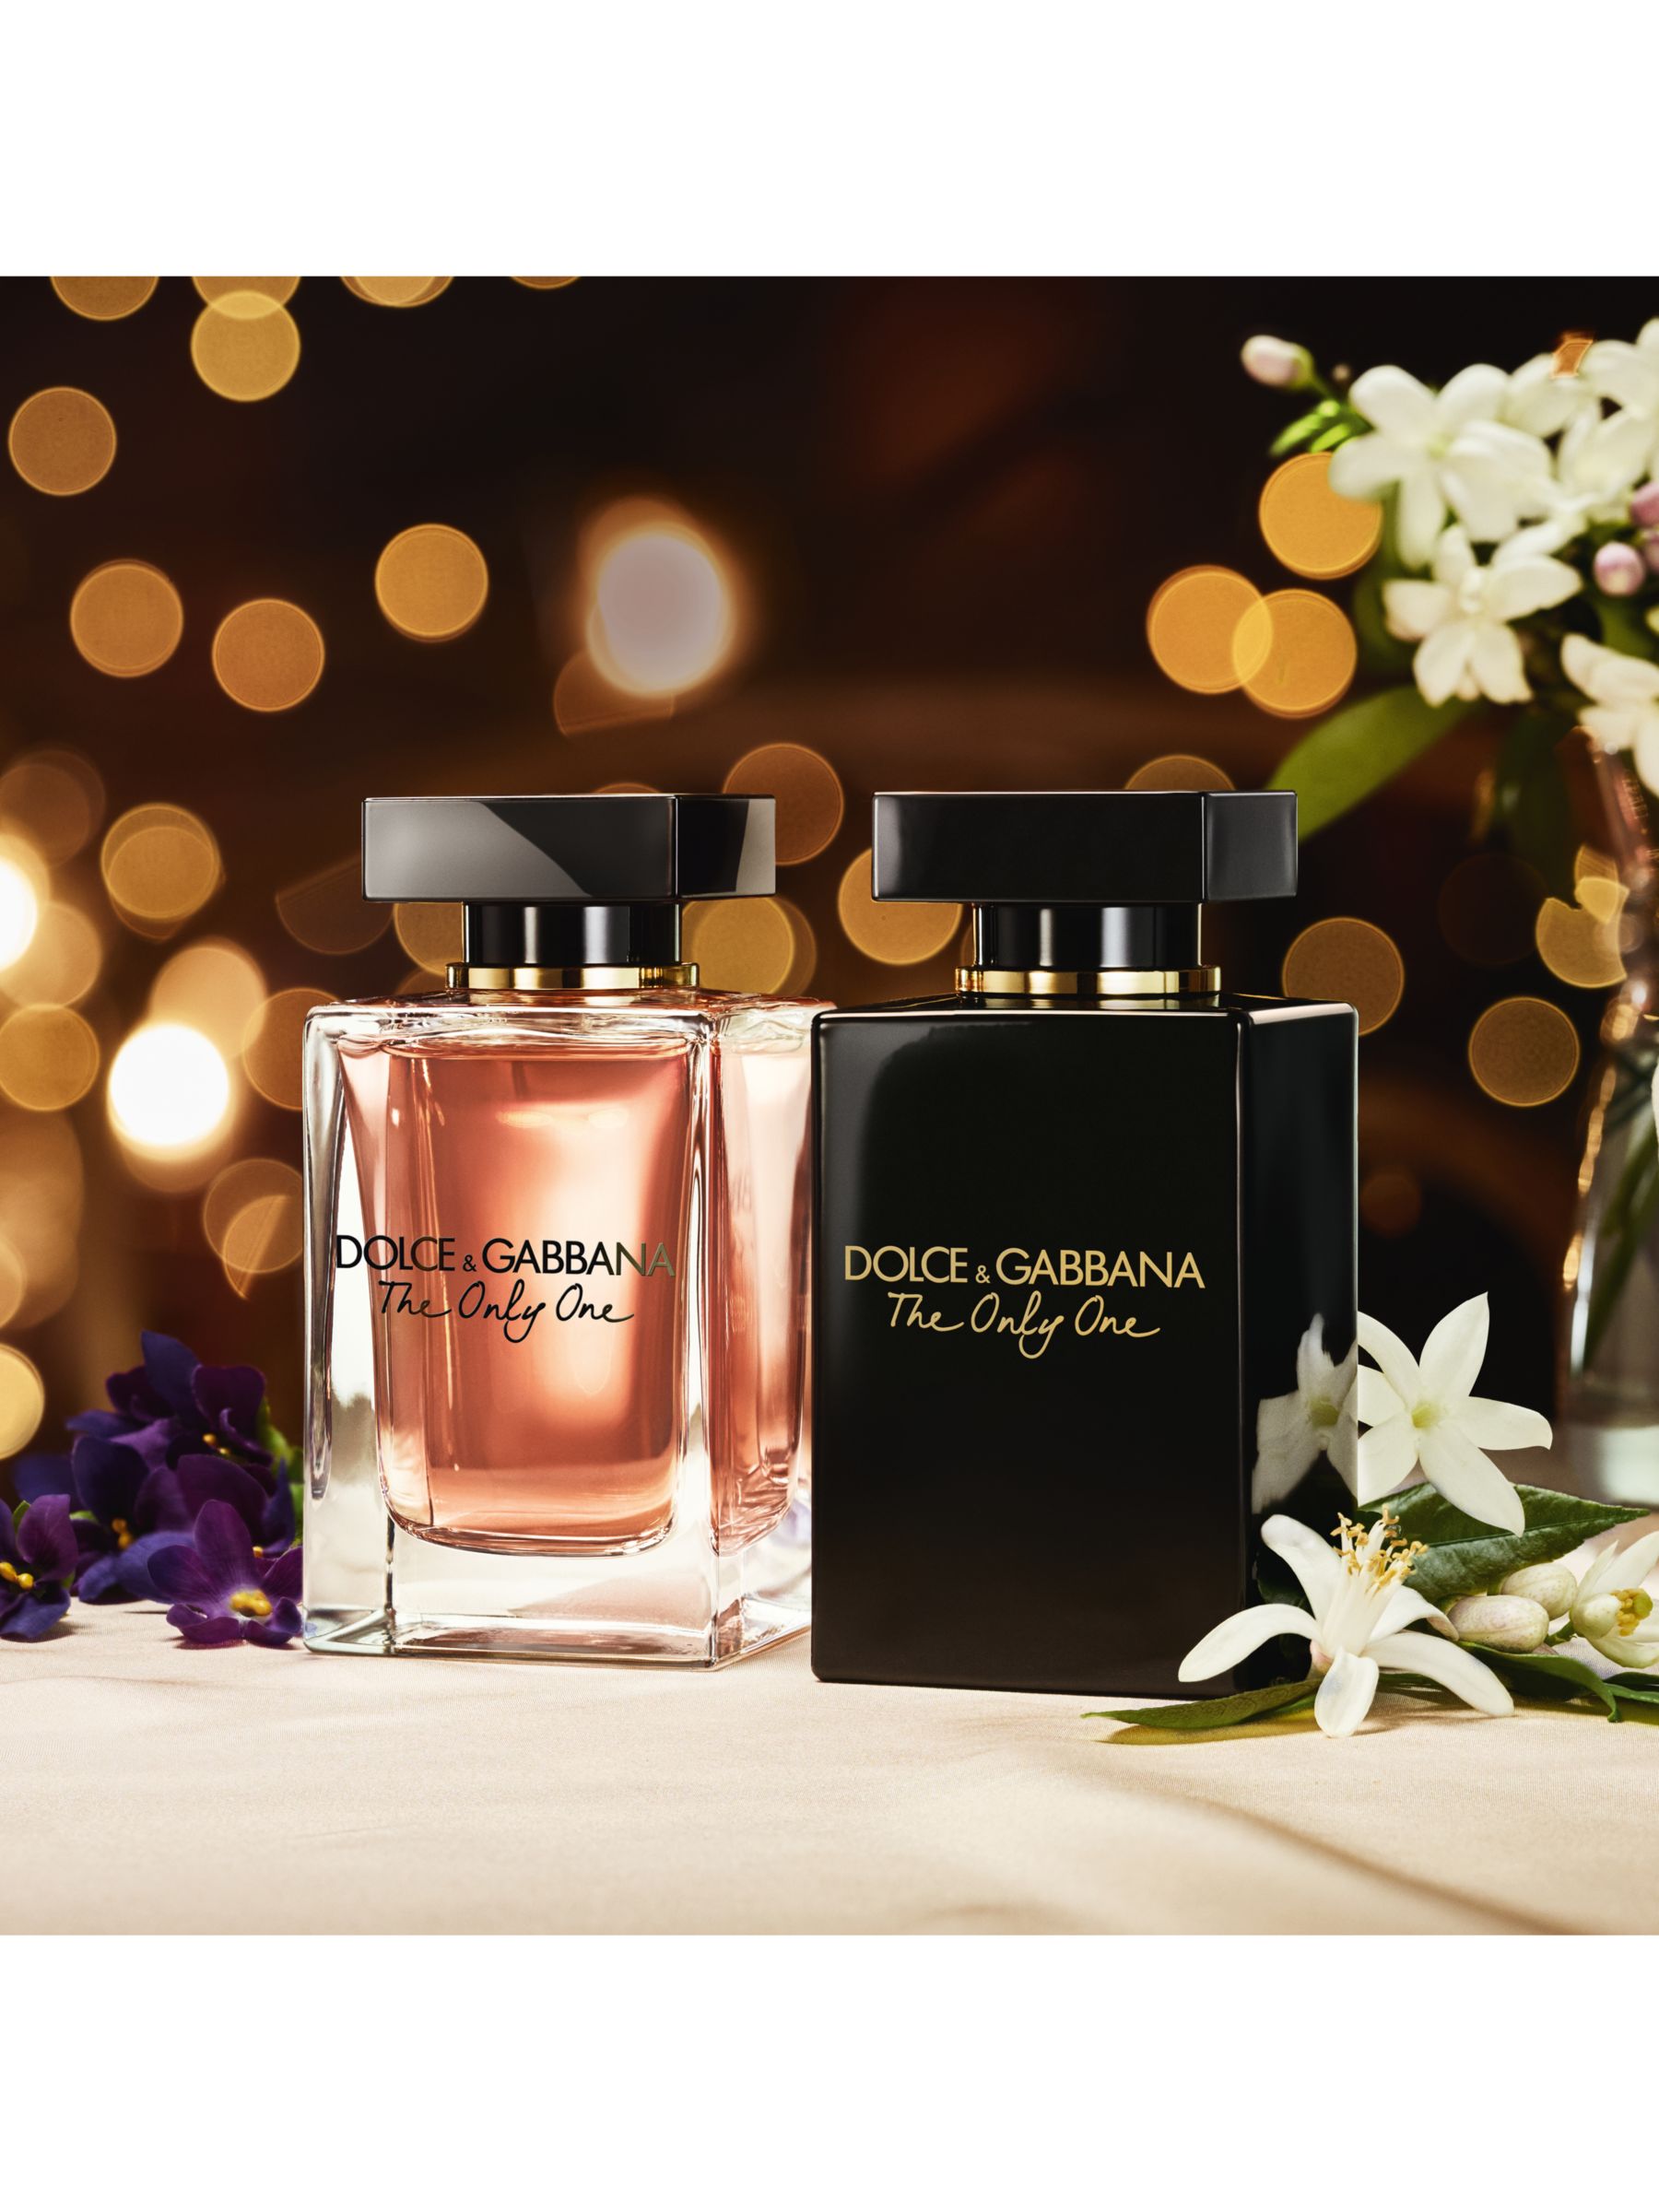 dolce and gabbana perfume the only one price